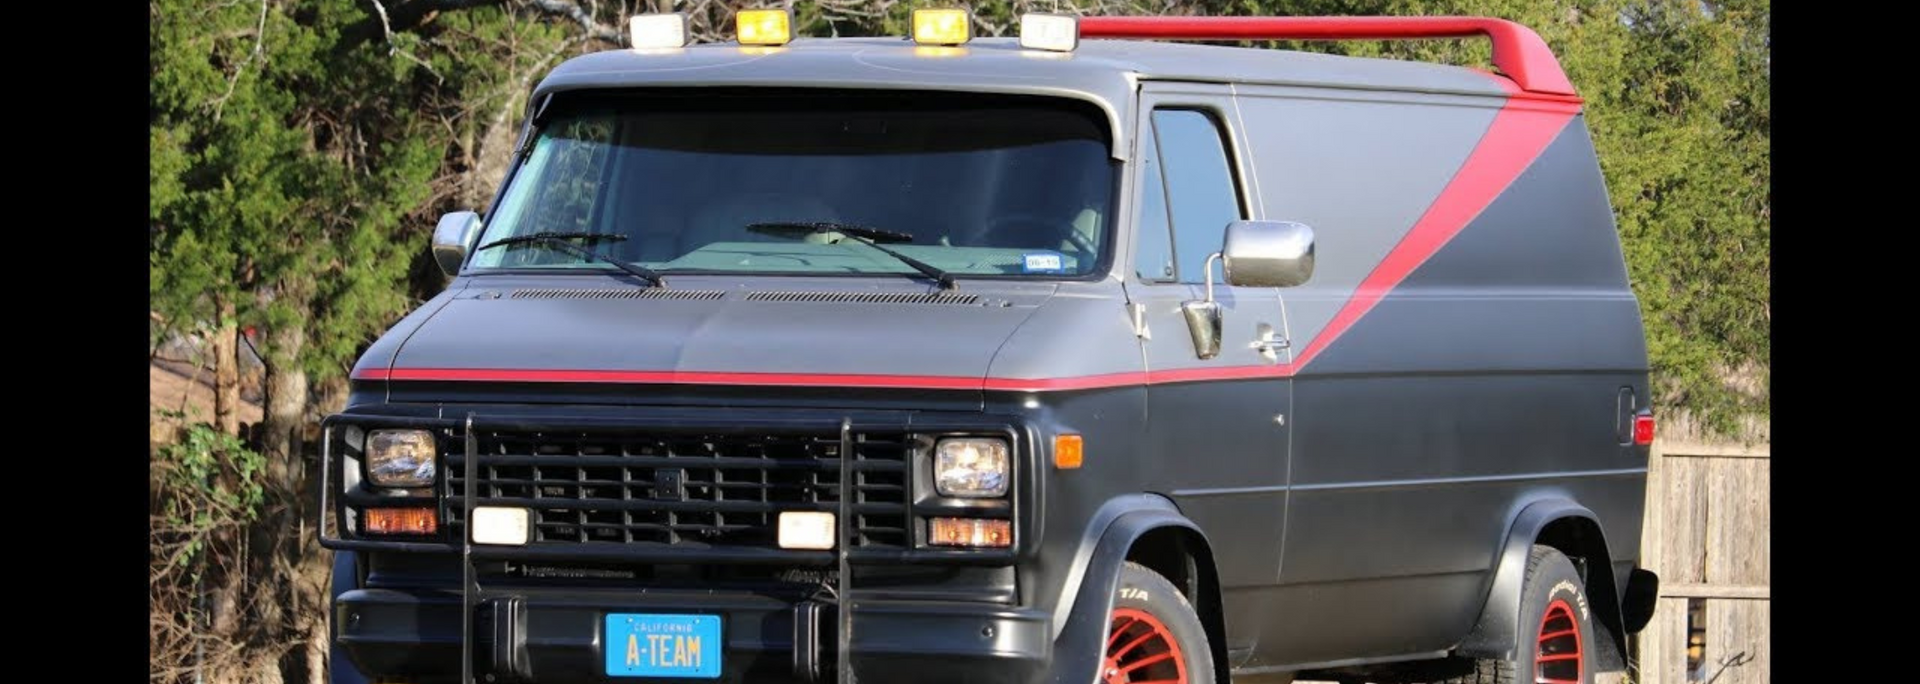 Picture of the A-Team van.